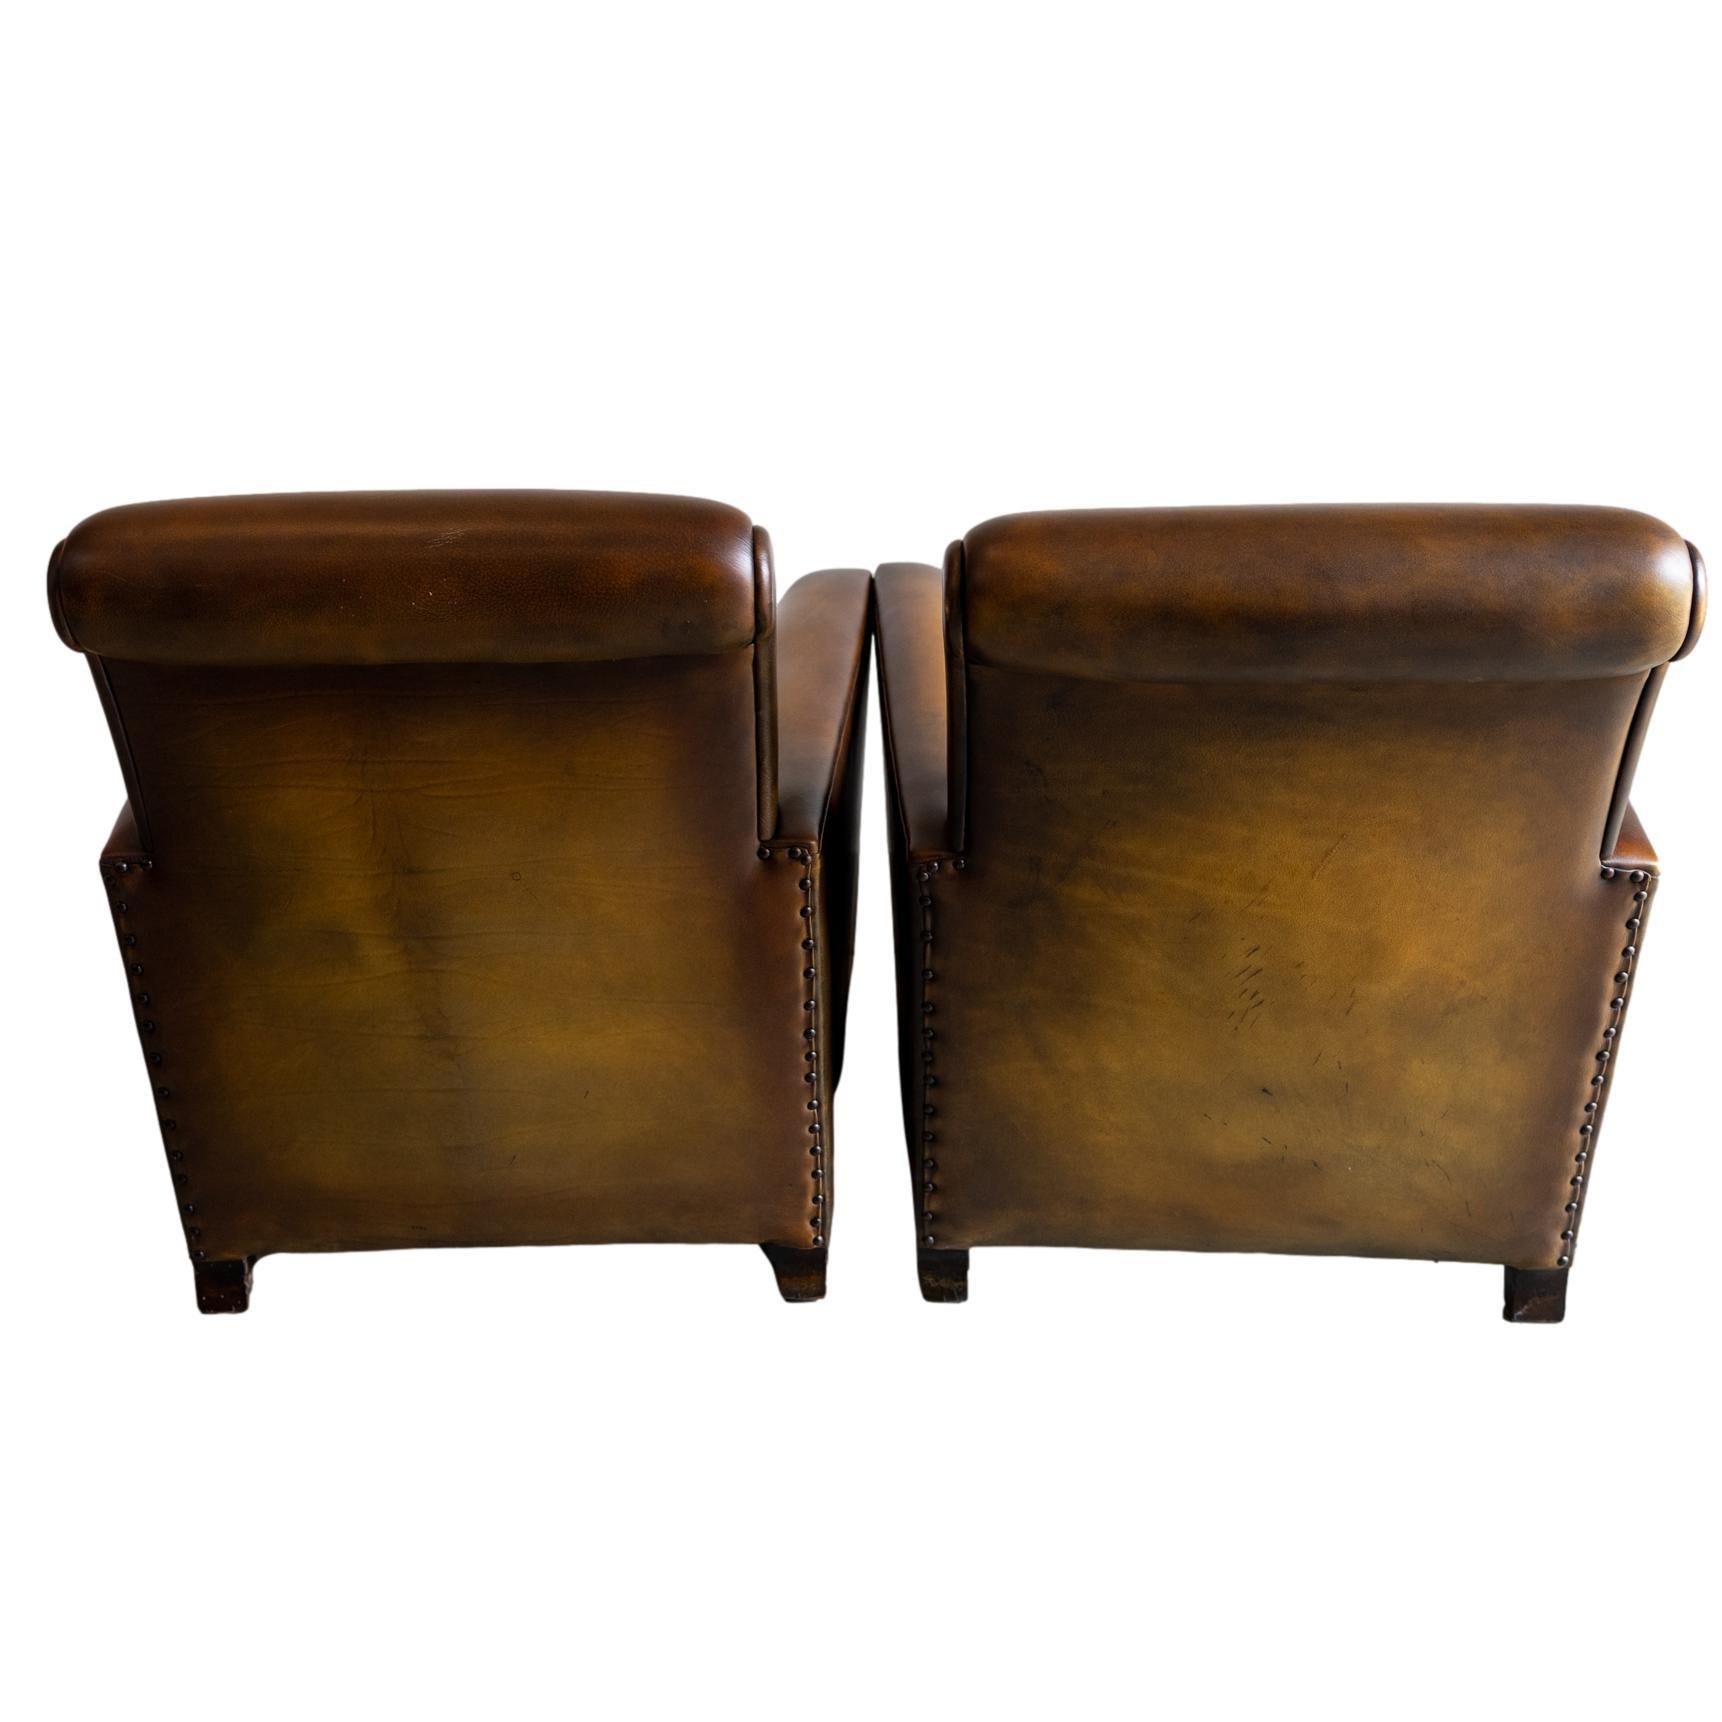 A Pair of Art Deco Leather Club Chairs, French, ca. 1935 For Sale 2